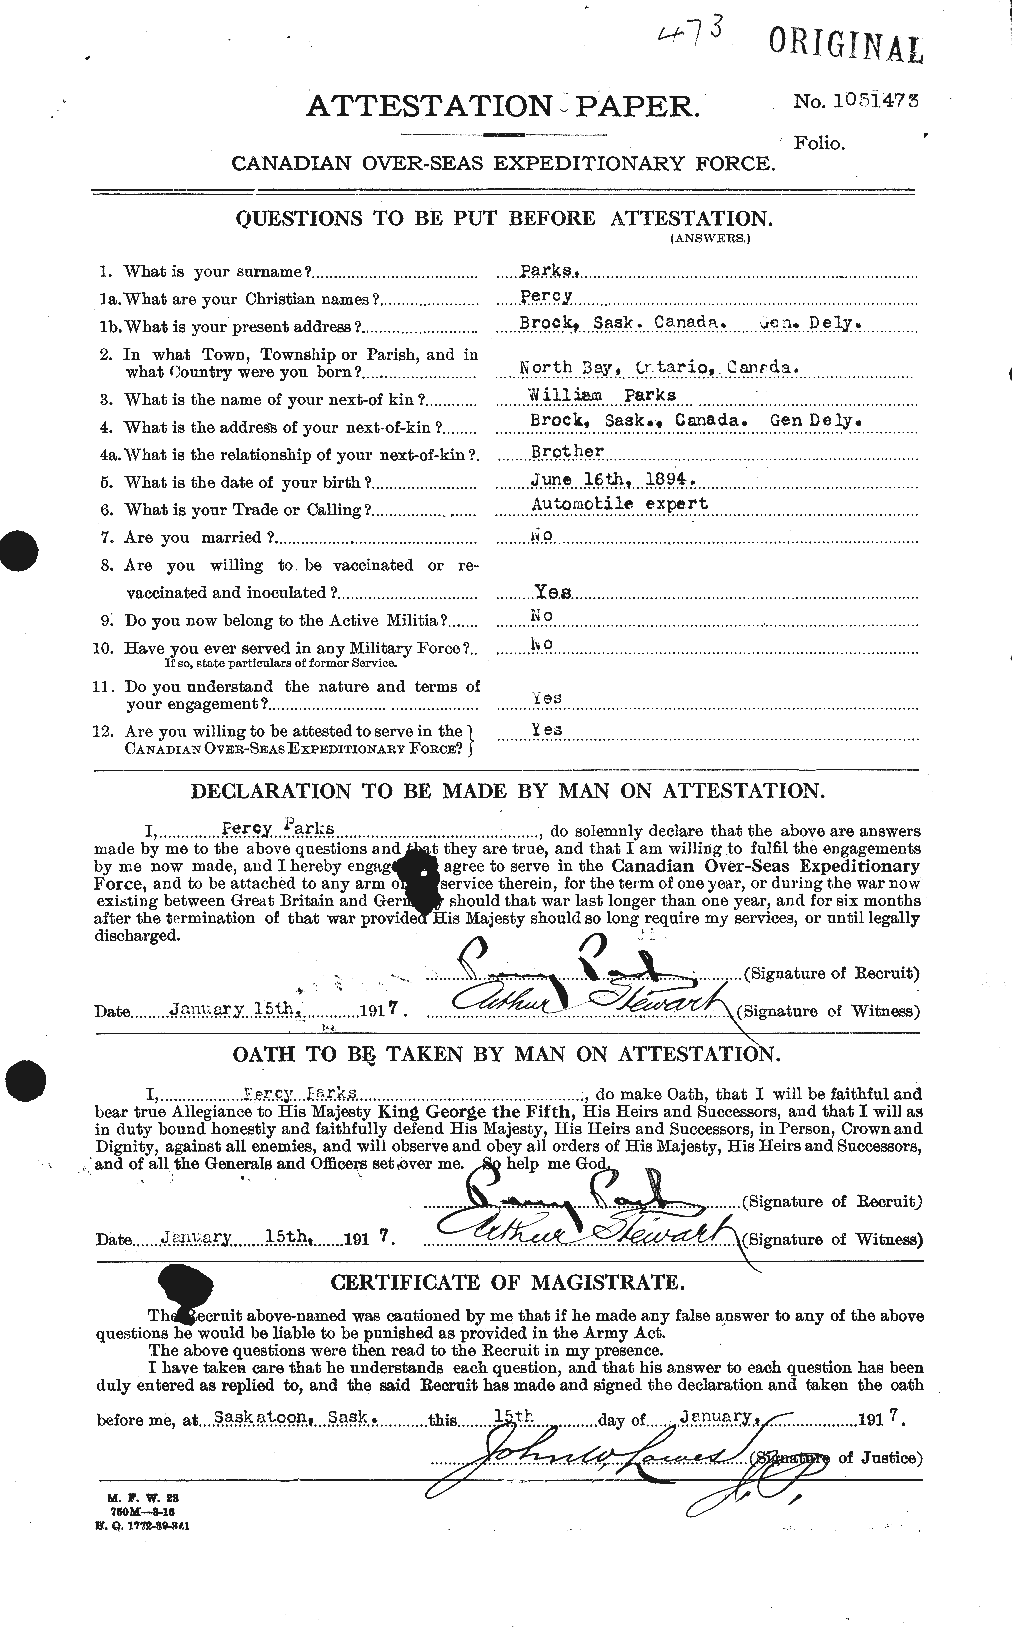 Personnel Records of the First World War - CEF 566193a